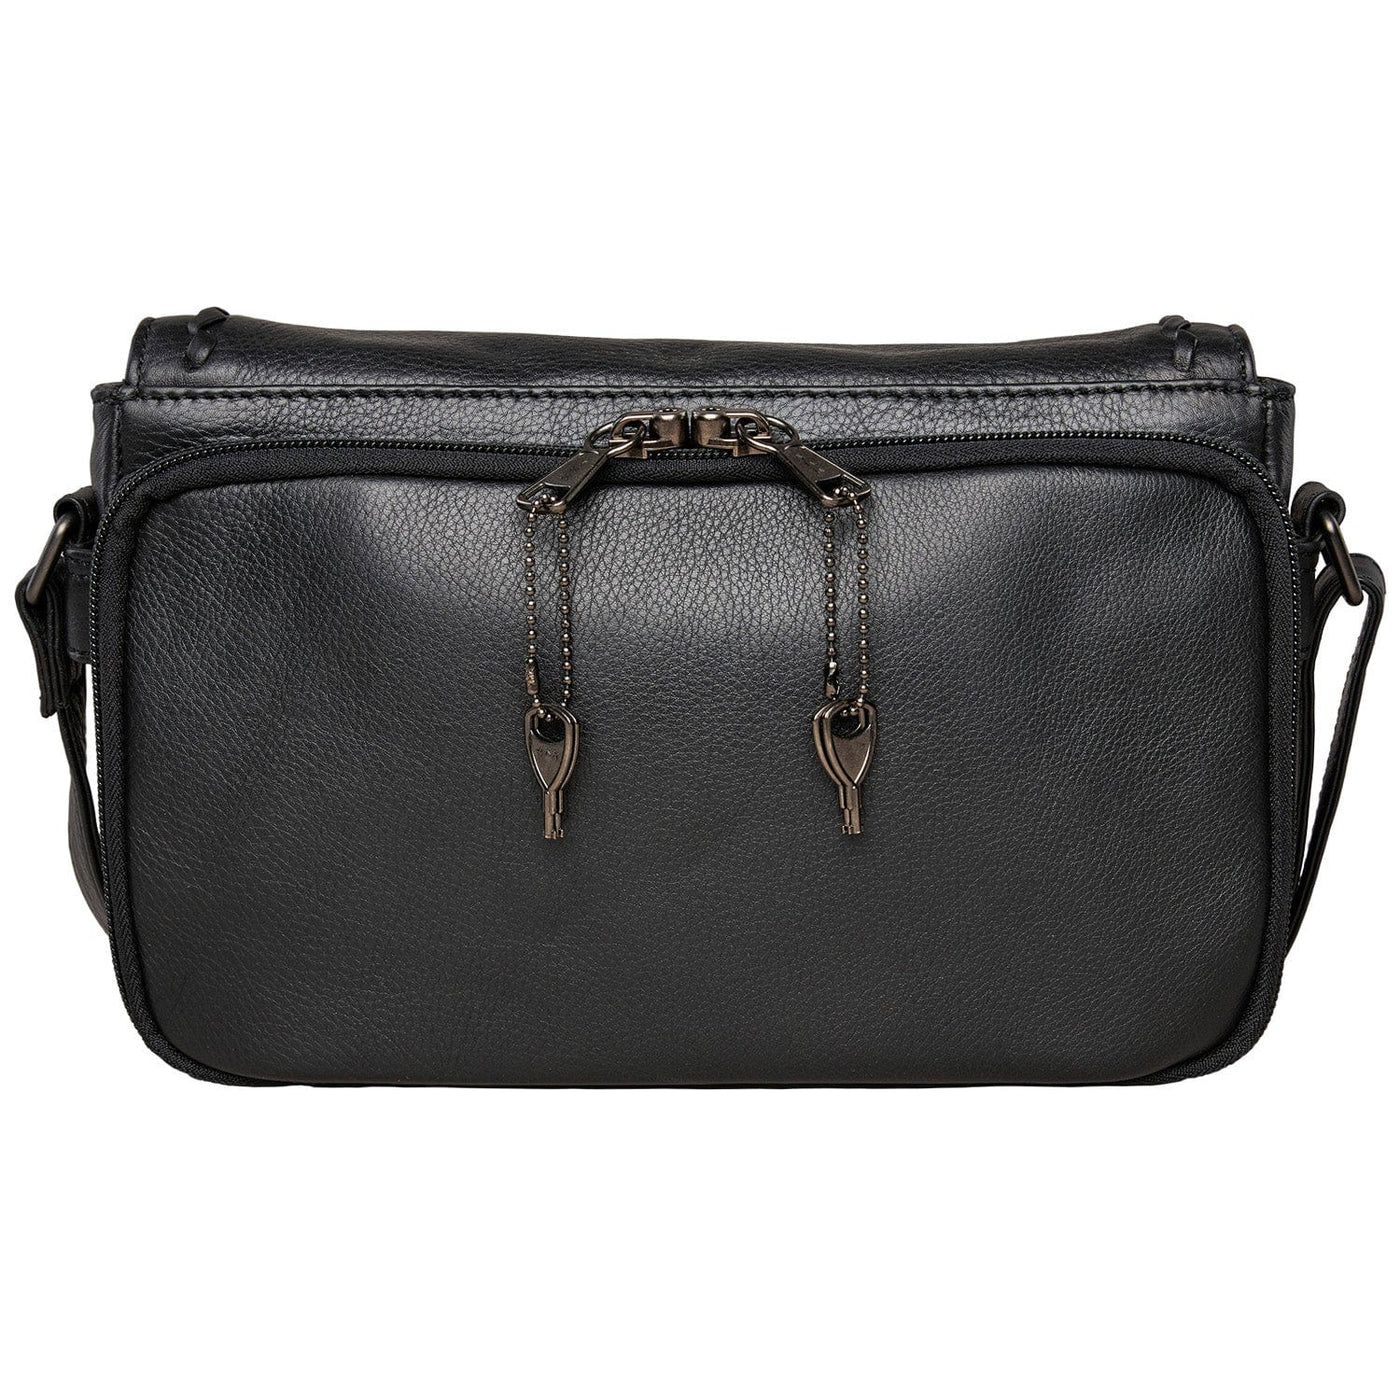 Concealed Carry Parker Crossbody Bag by Lady Conceal